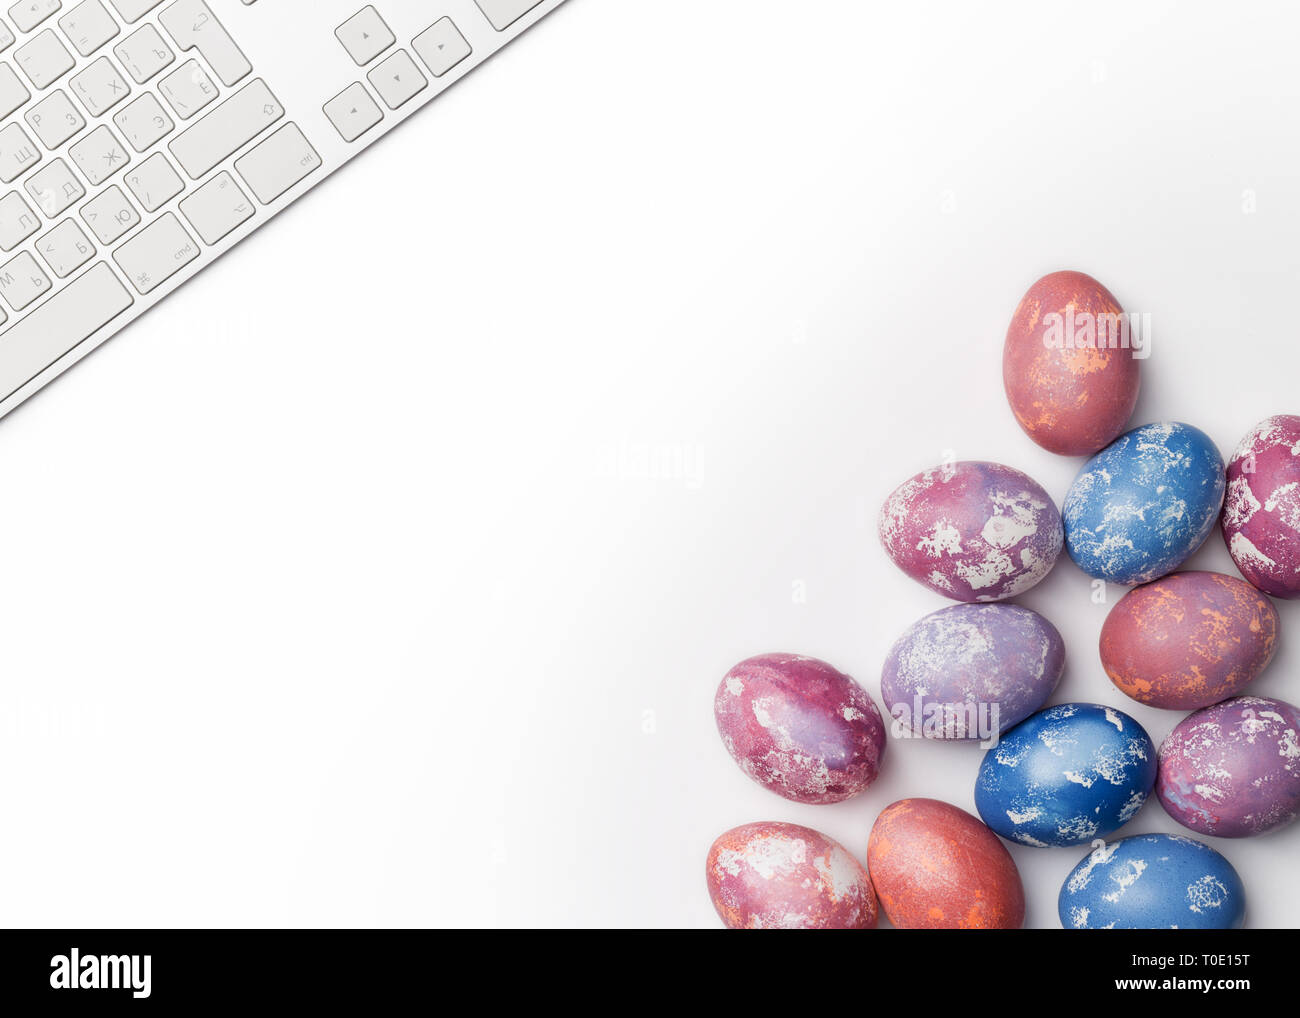 Easter multicolored eggs in right corner with keyboard in left corner isolated on white background. Concept of Easter card, free space for text. Flat  Stock Photo